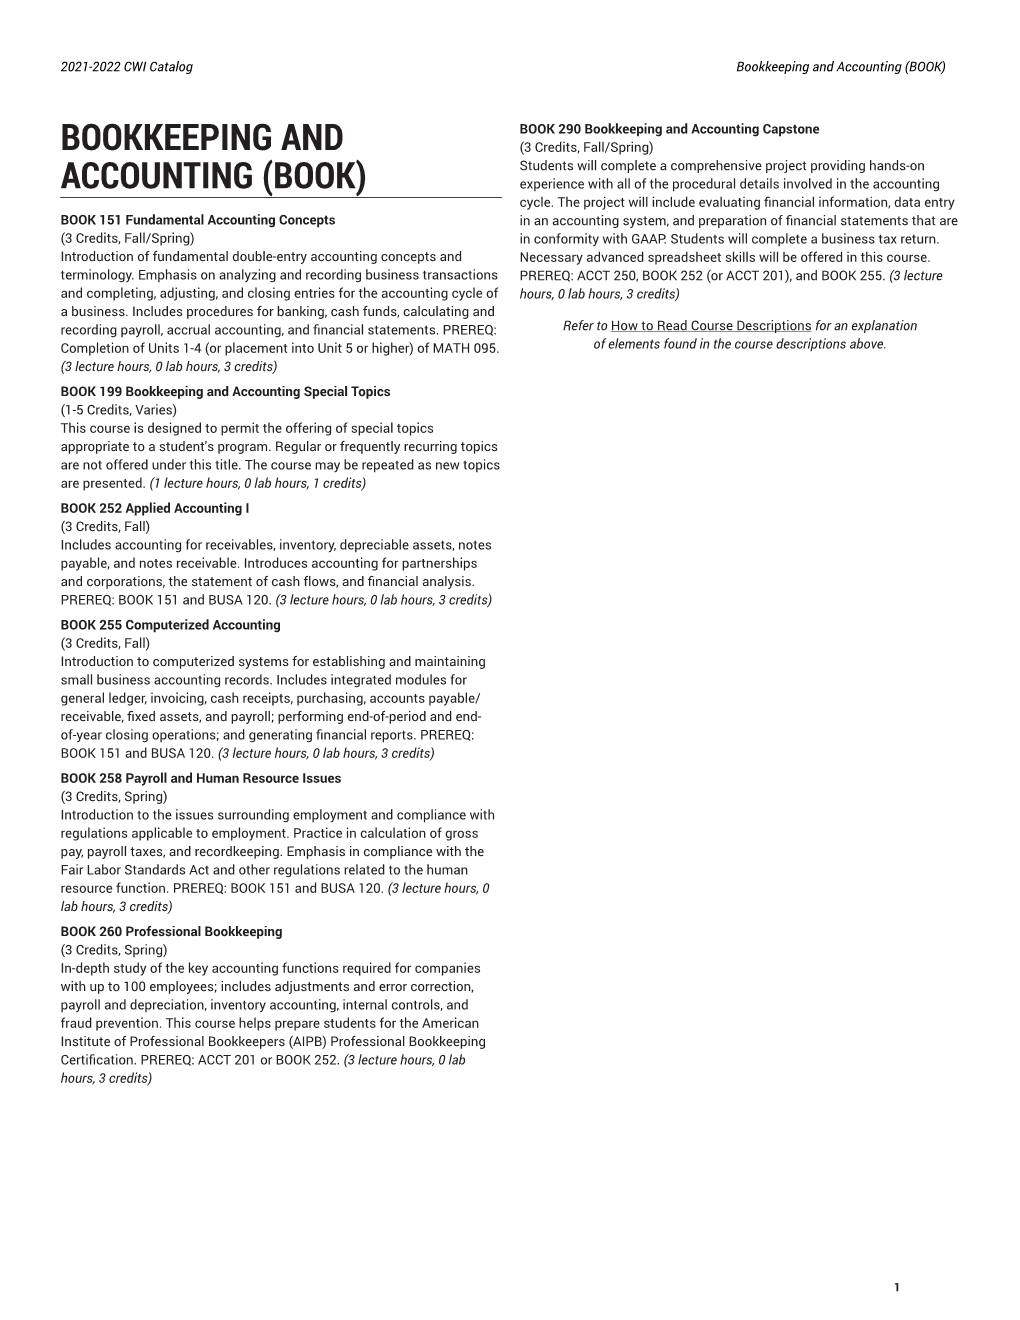 Bookkeeping and Accounting (BOOK)